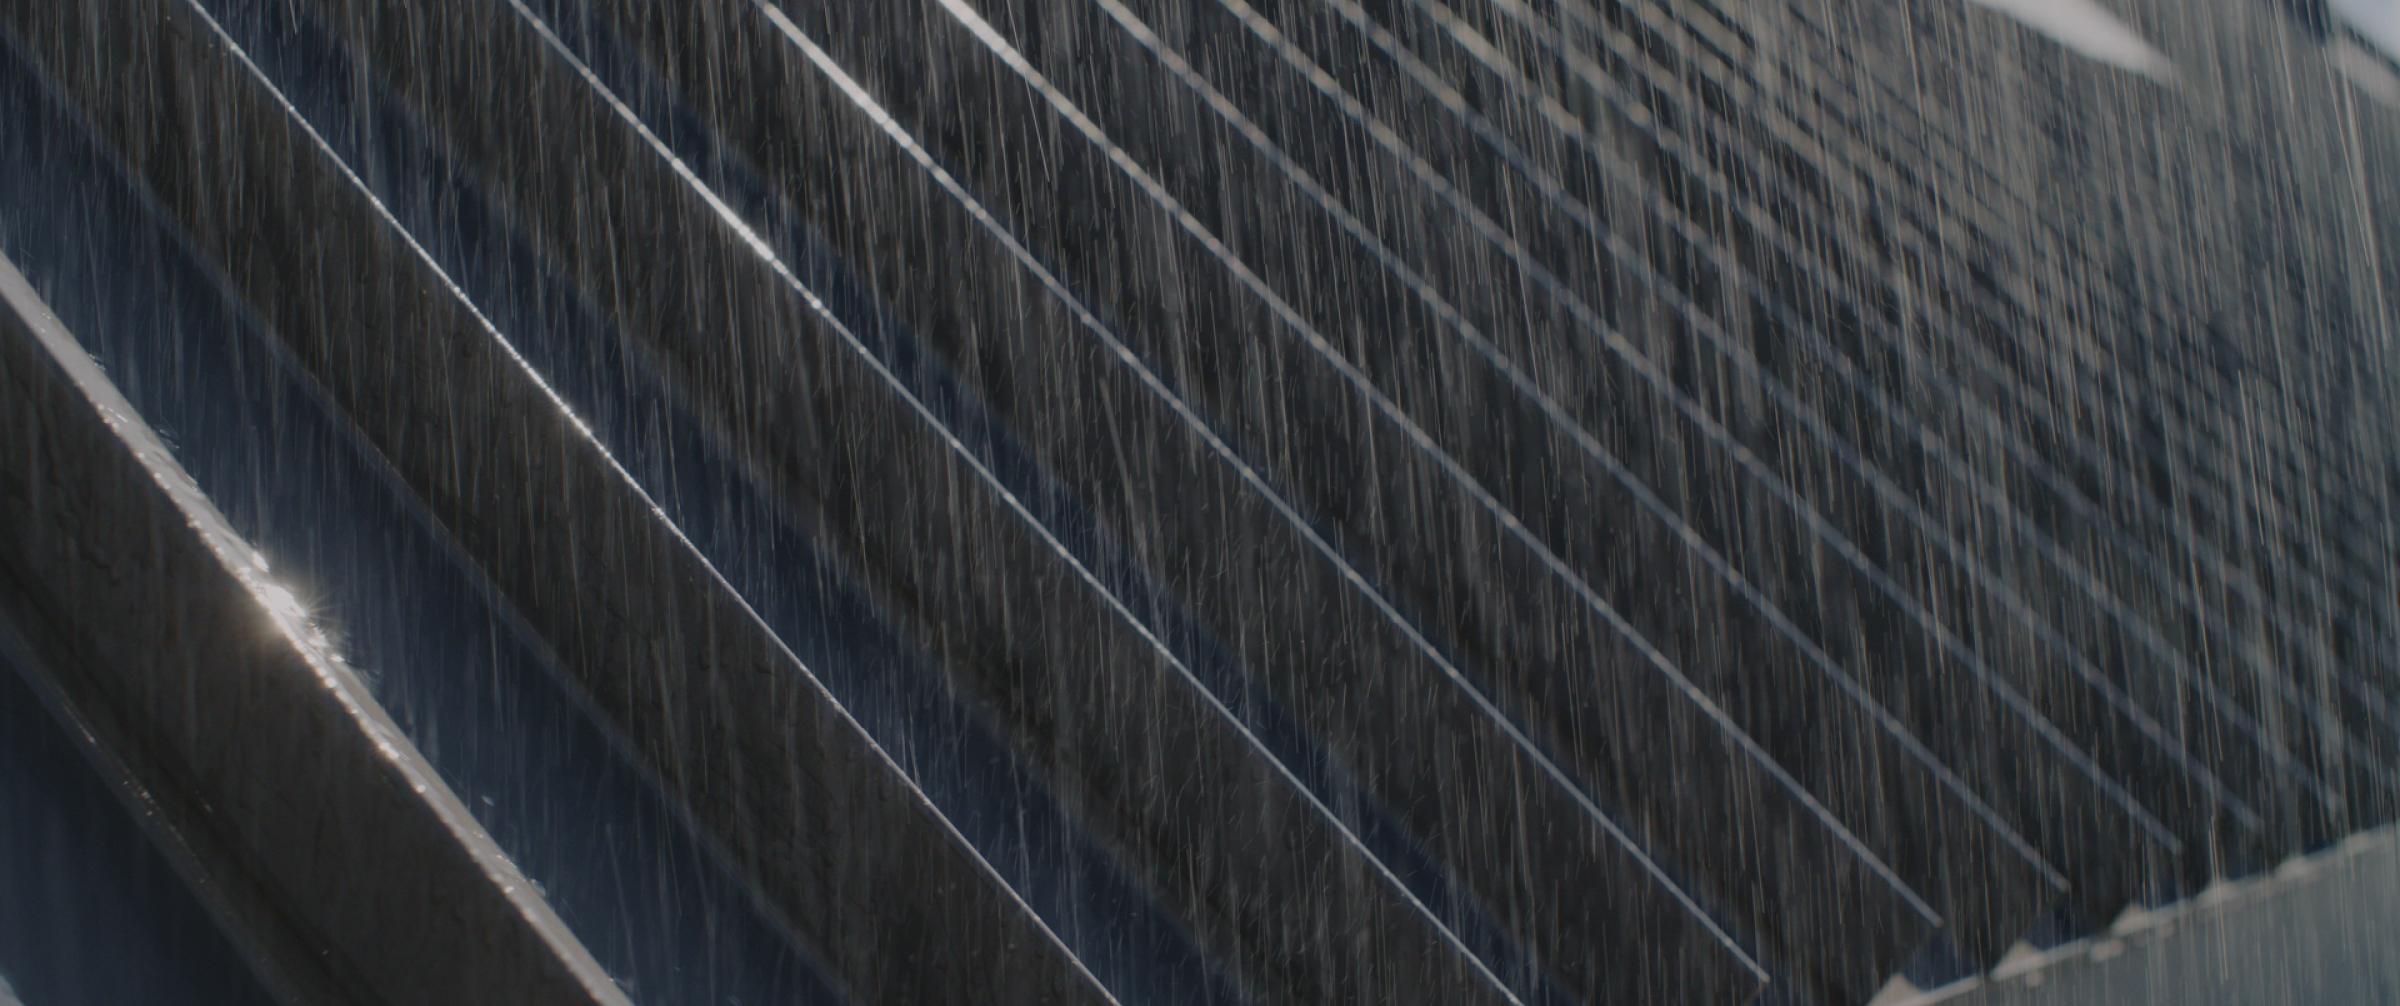 Rain falling on roofing made from COLORBOND® steel